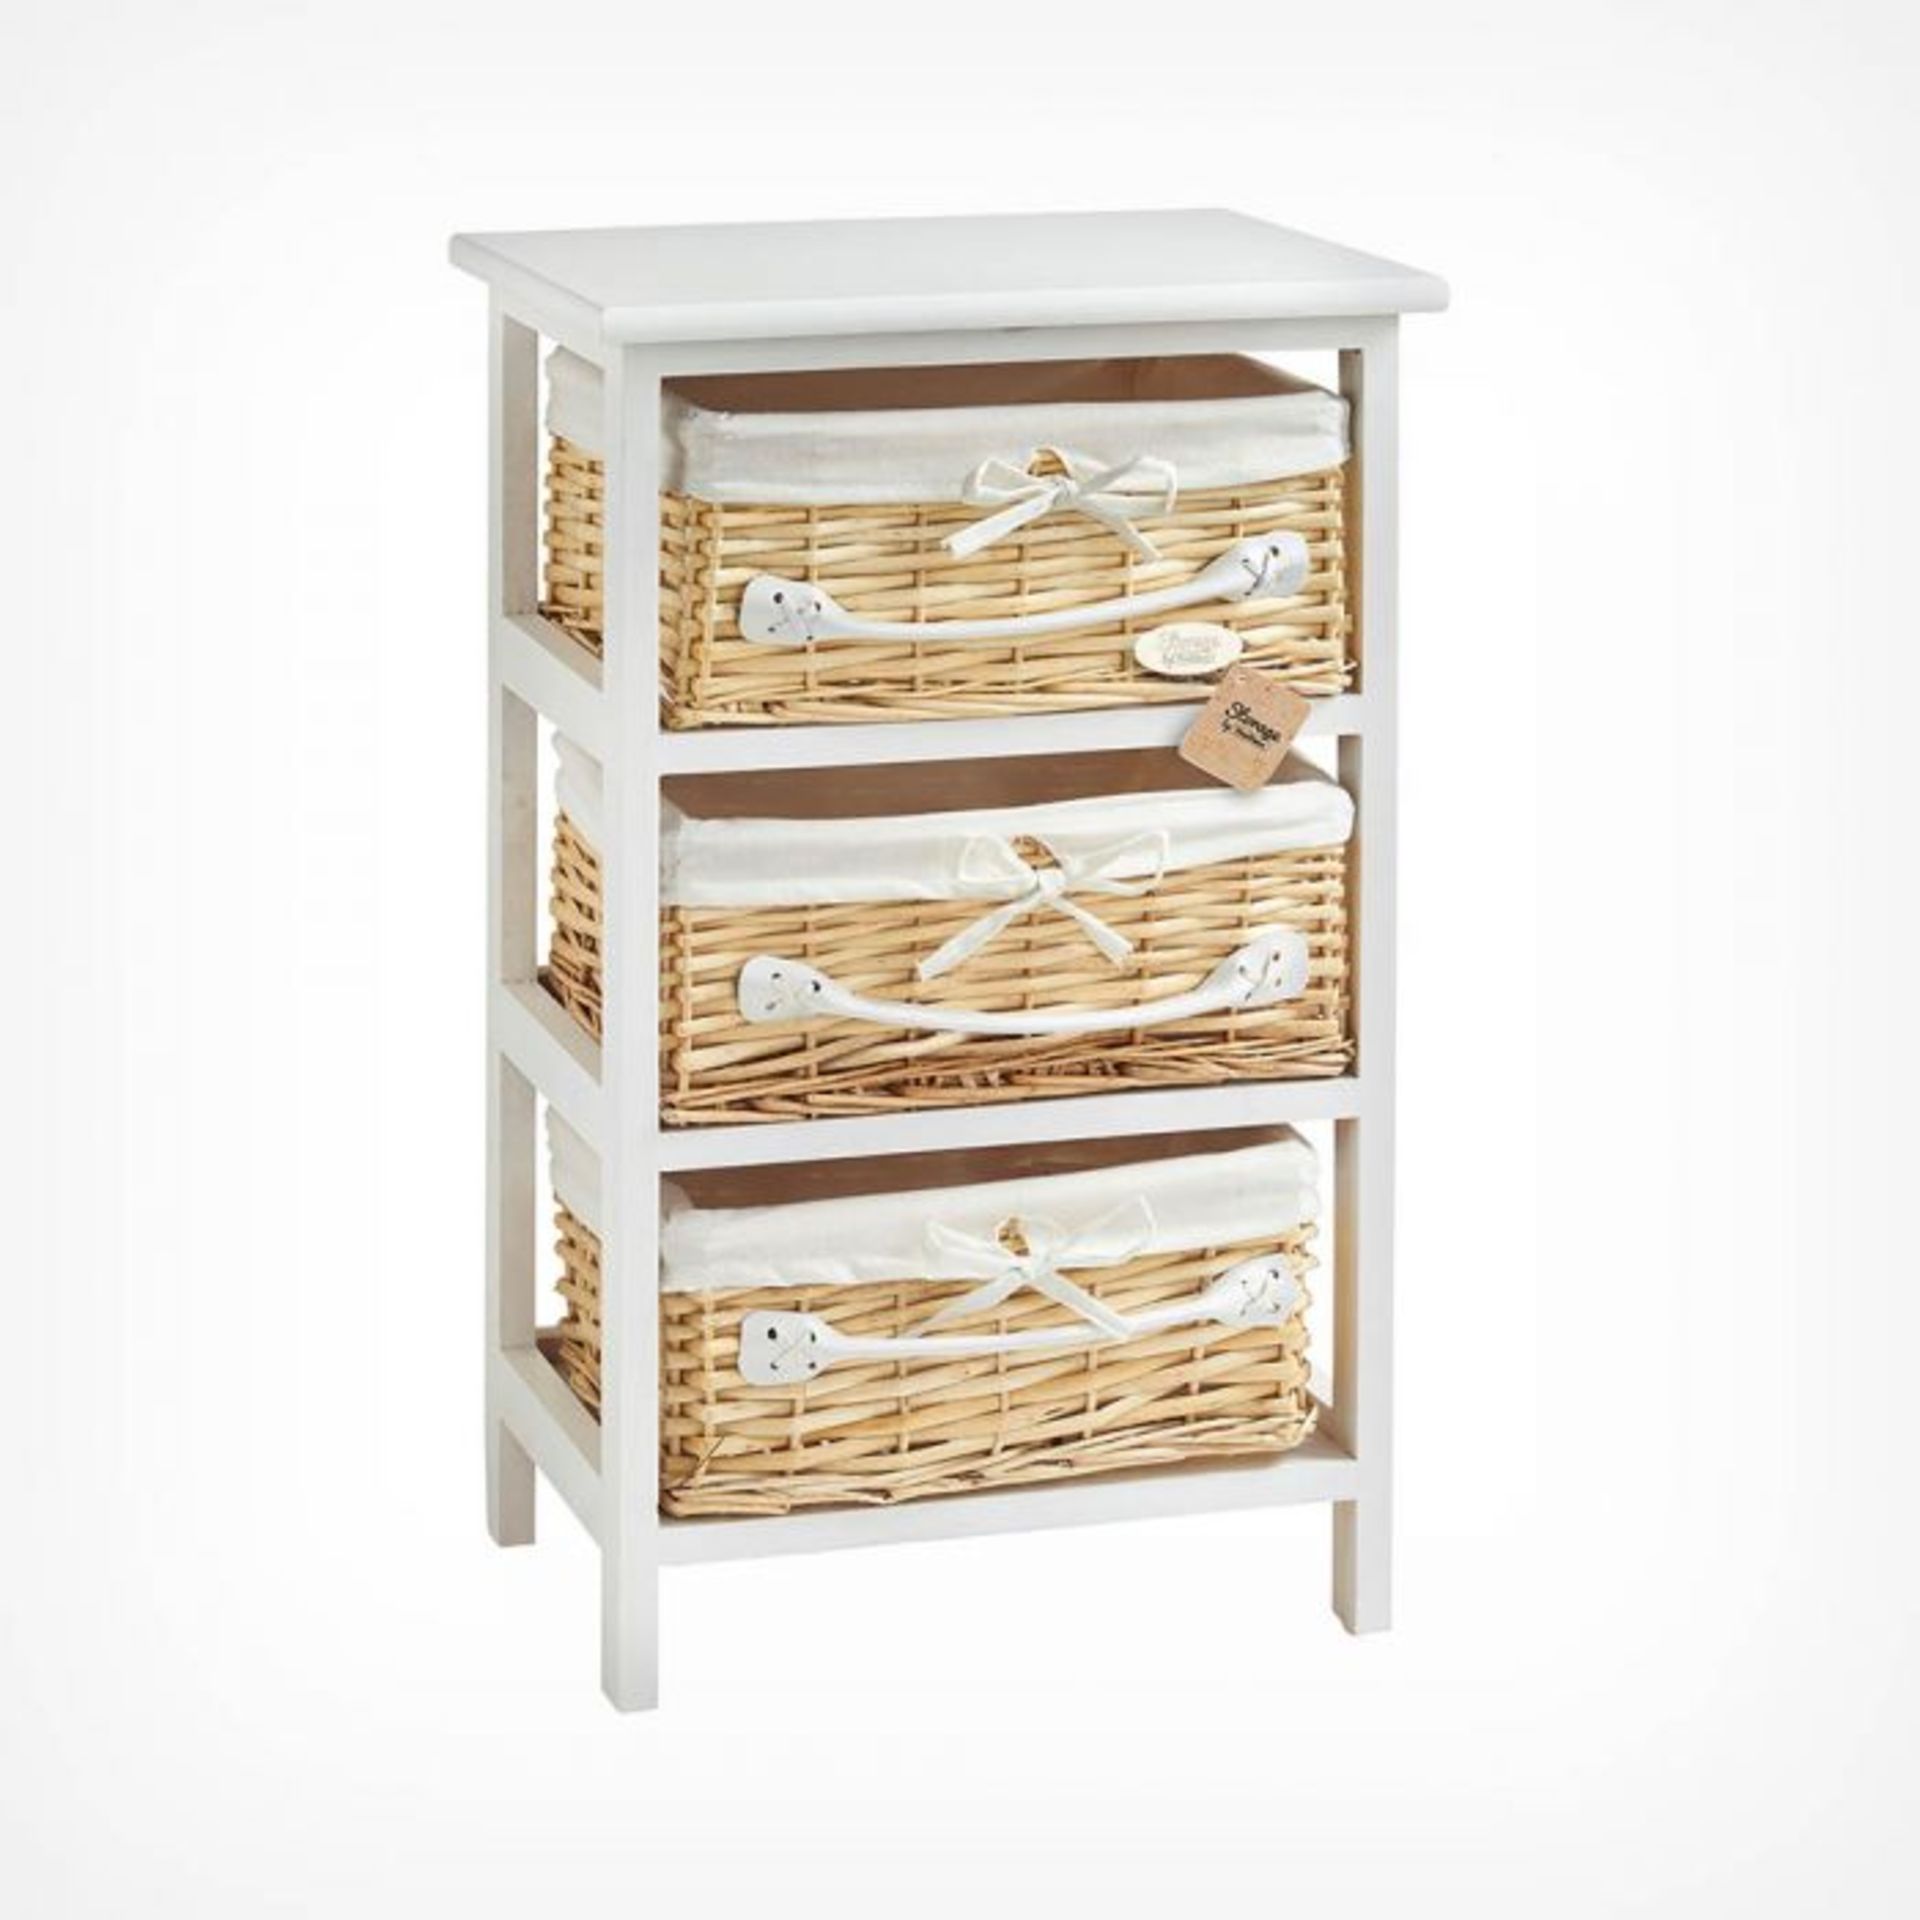 (S418) 3 Drawer Wicker Storage Unit Three 100% natural wicker basket style drawers with handle... - Image 2 of 4